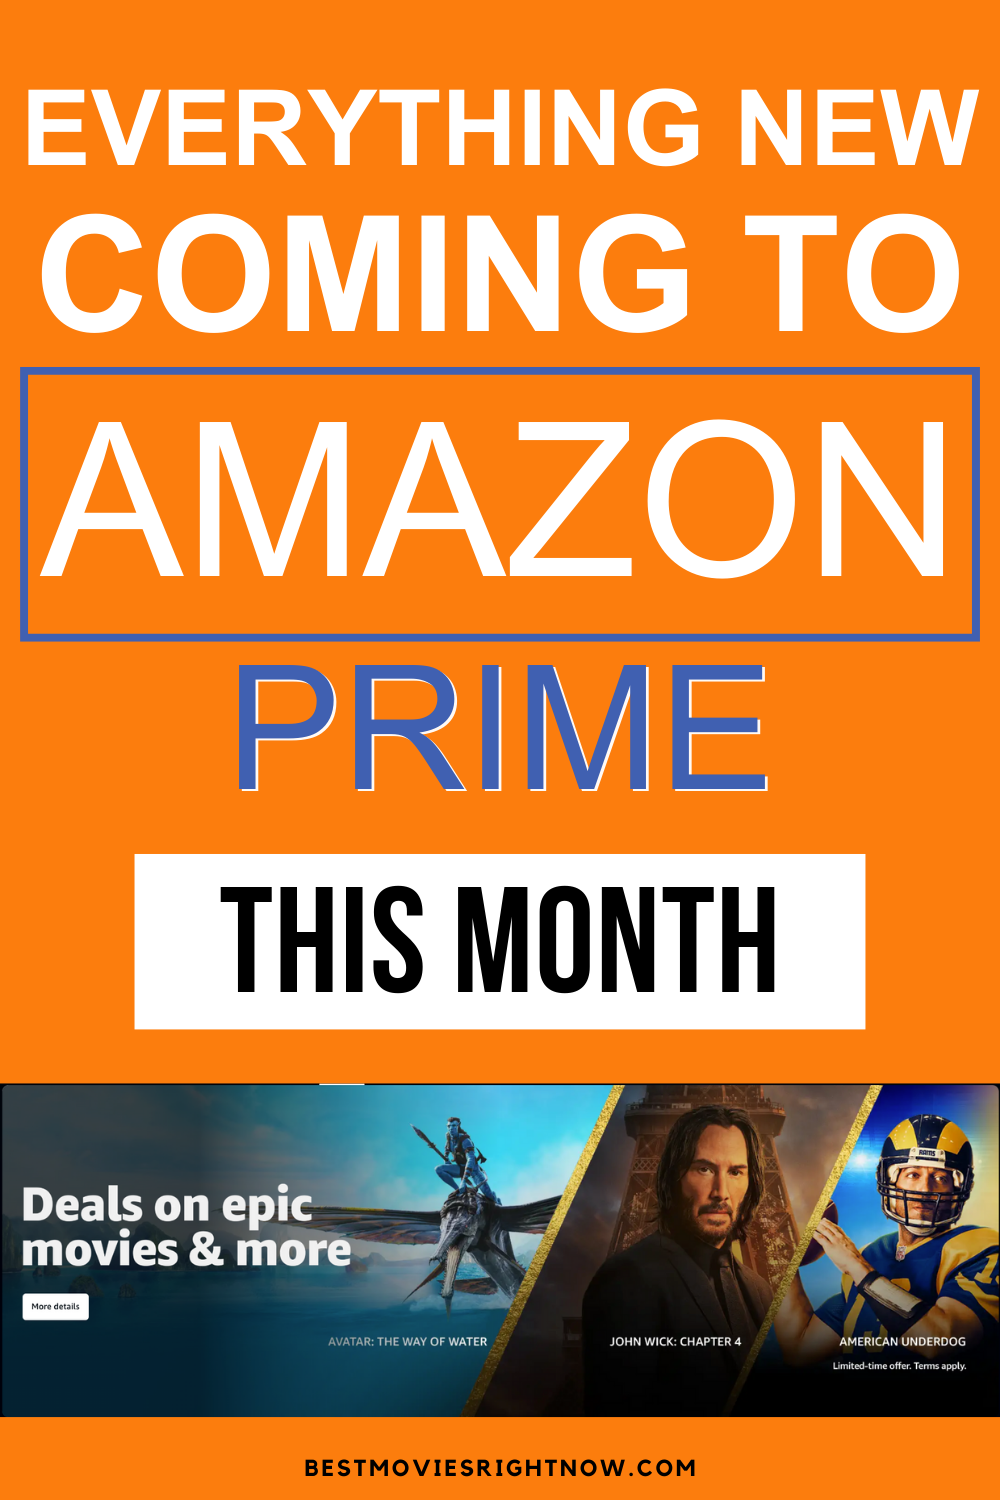 New Shows Coming to Amazon Prime this Month pin image with text